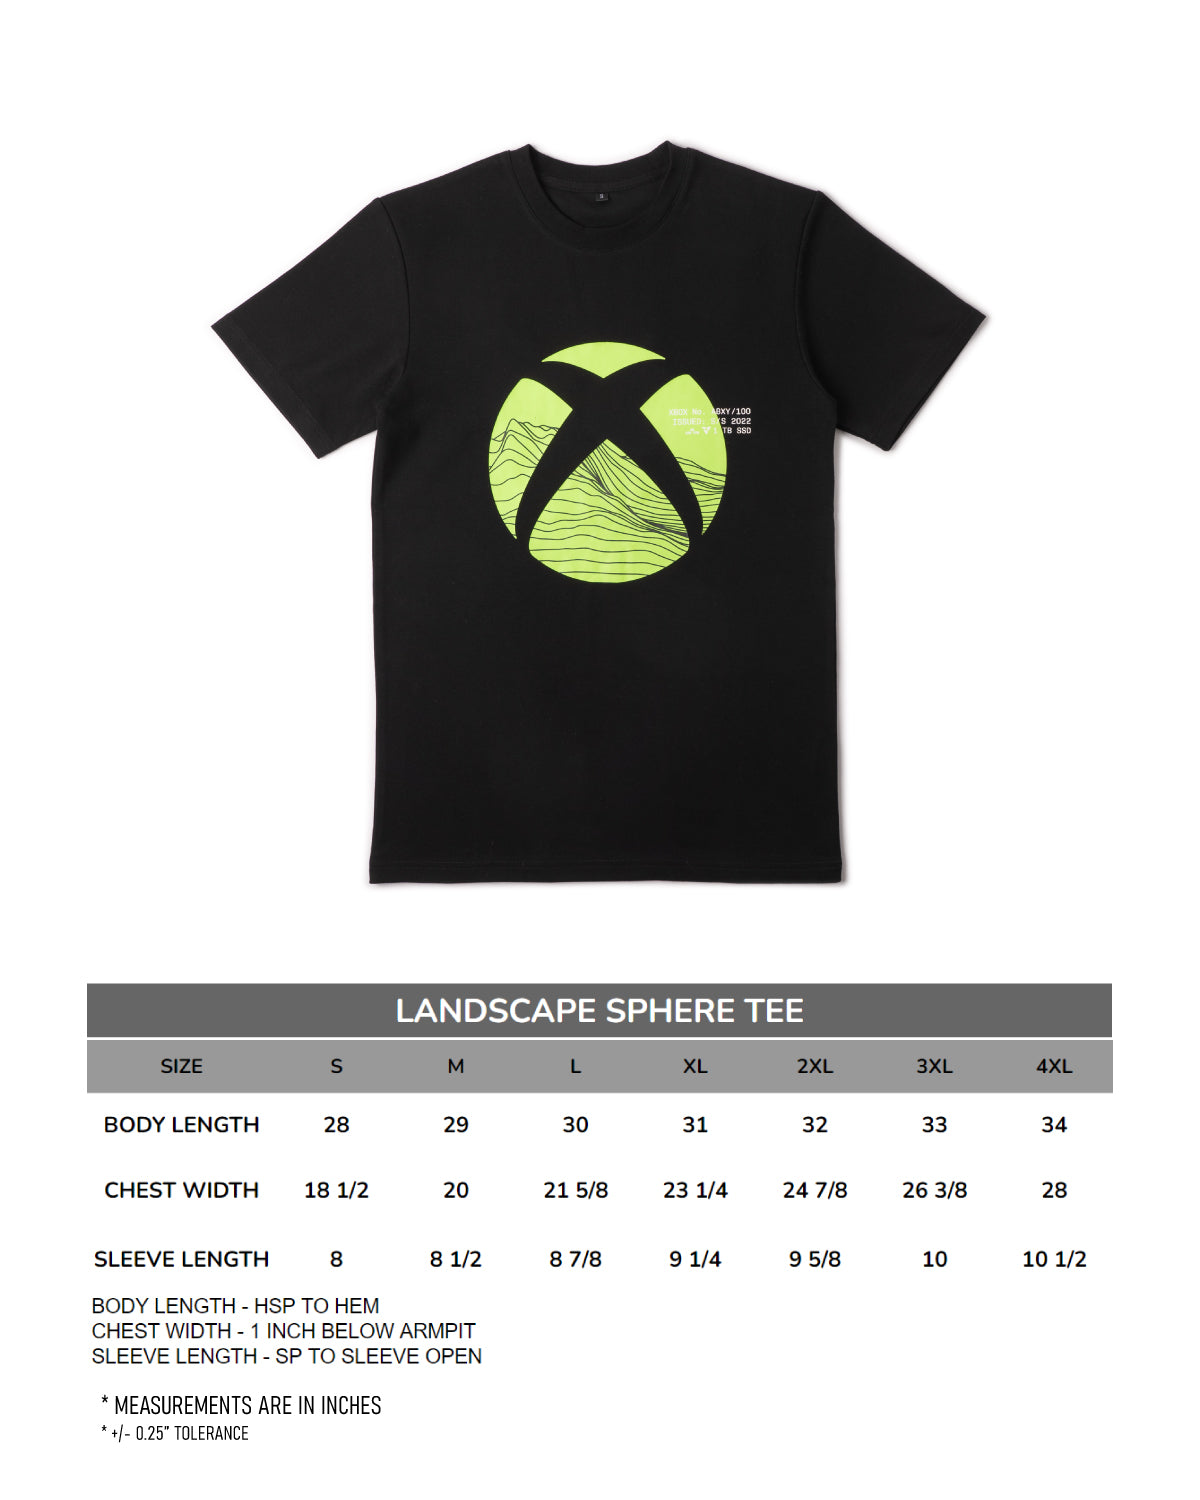 All products – Xbox Gear Shop